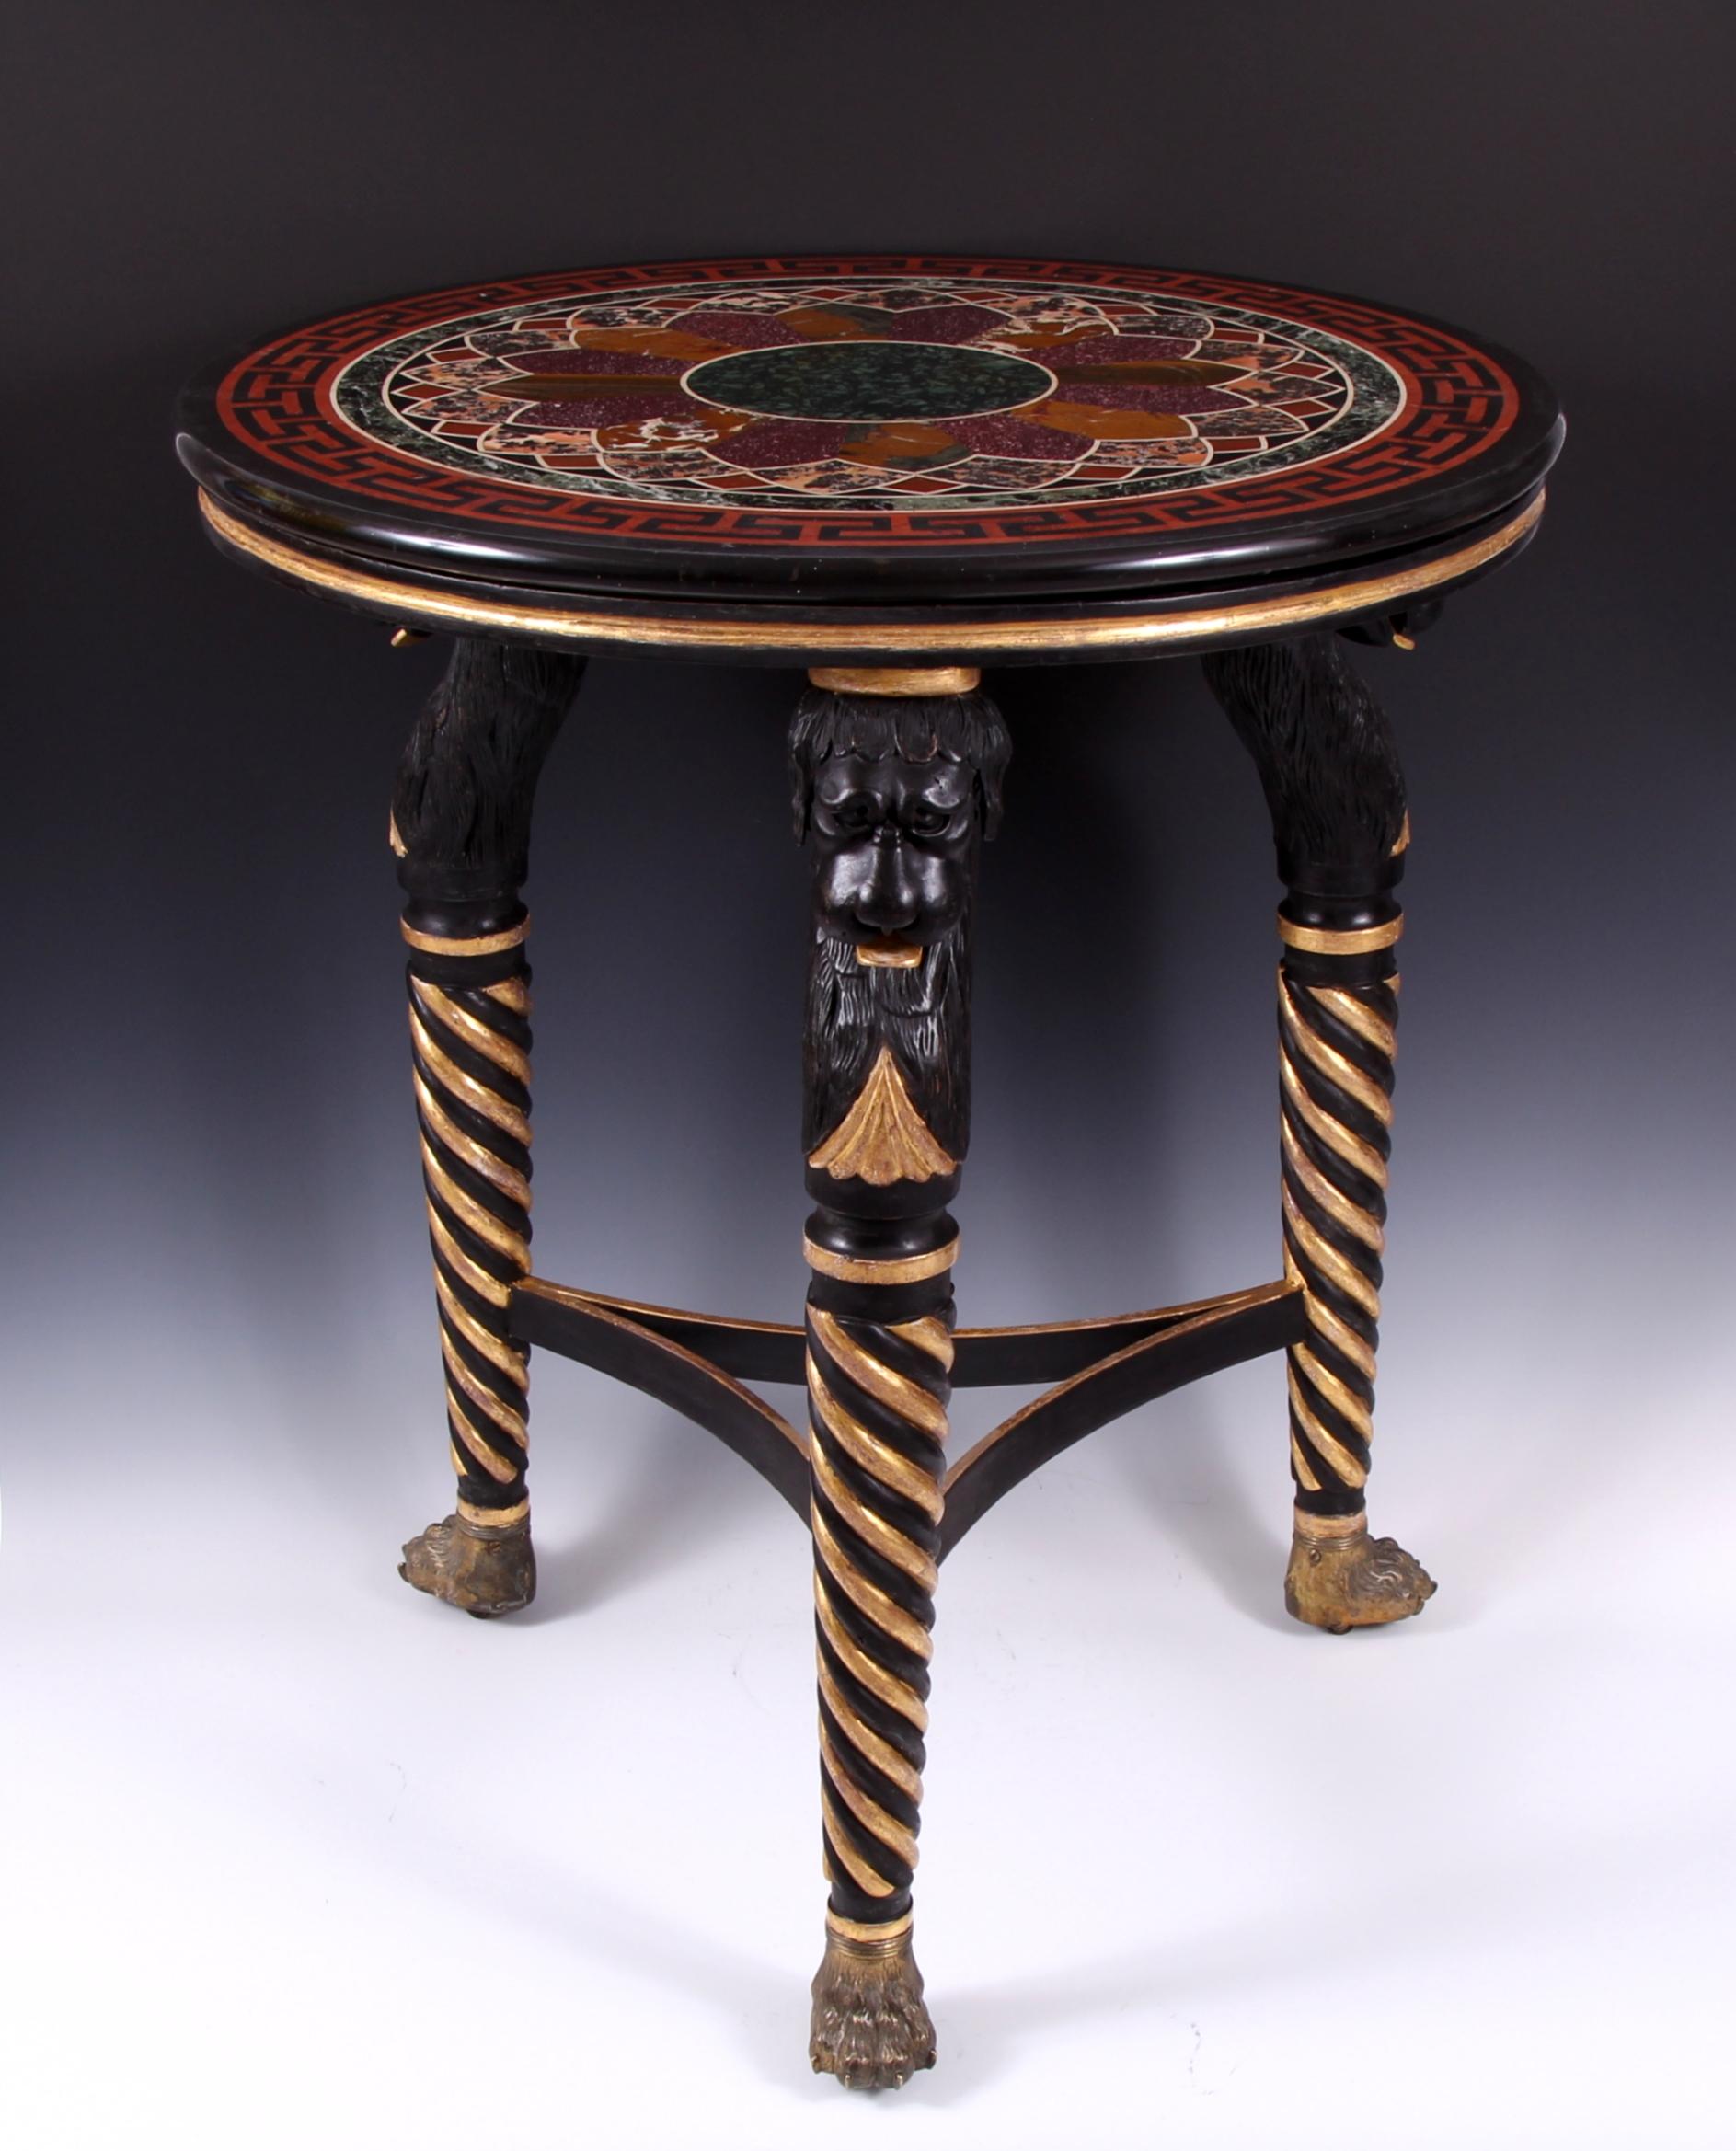 Important and extremely rare early 19th century bronzed wood and parcel-gilt specimen hardstone table. The attention to detail and artistic design of this truly exceptional masterpiece is a delight to behold. The outstanding inlaid top, brought back